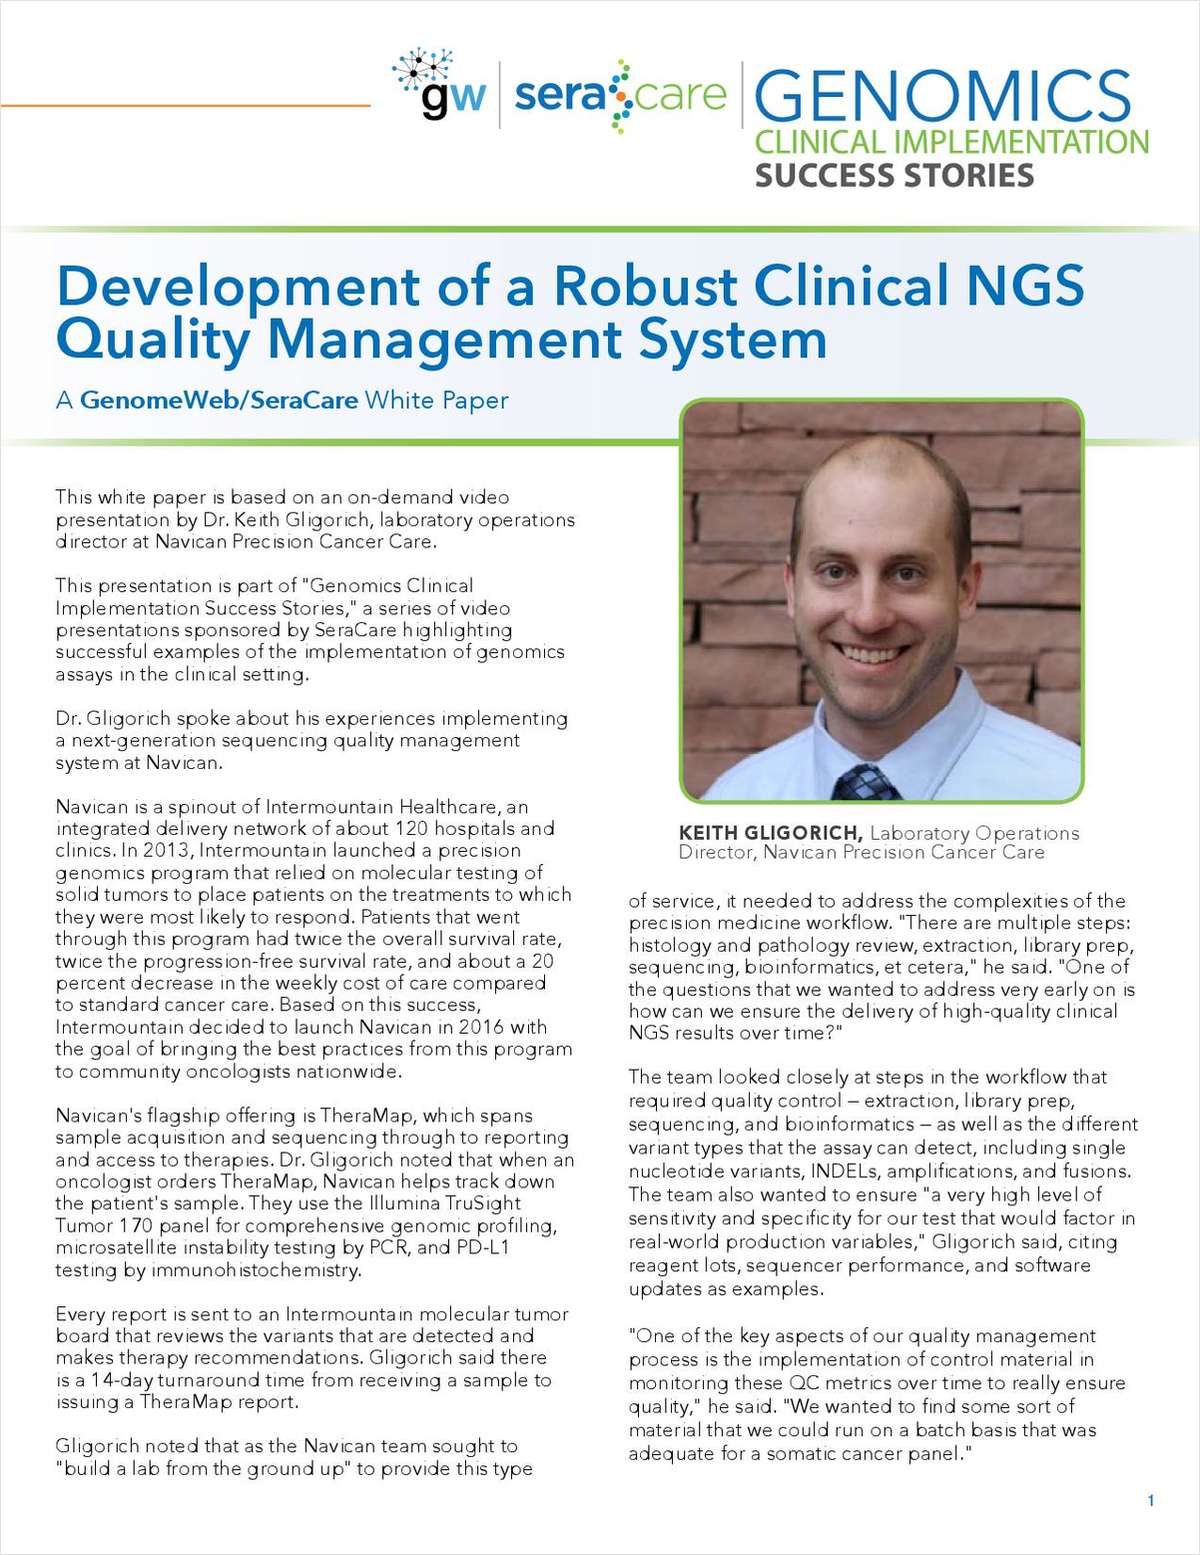 Genomics Clinical Implementation Success Stories: Development of a Robust Clinical NGS Quality Management System White Paper